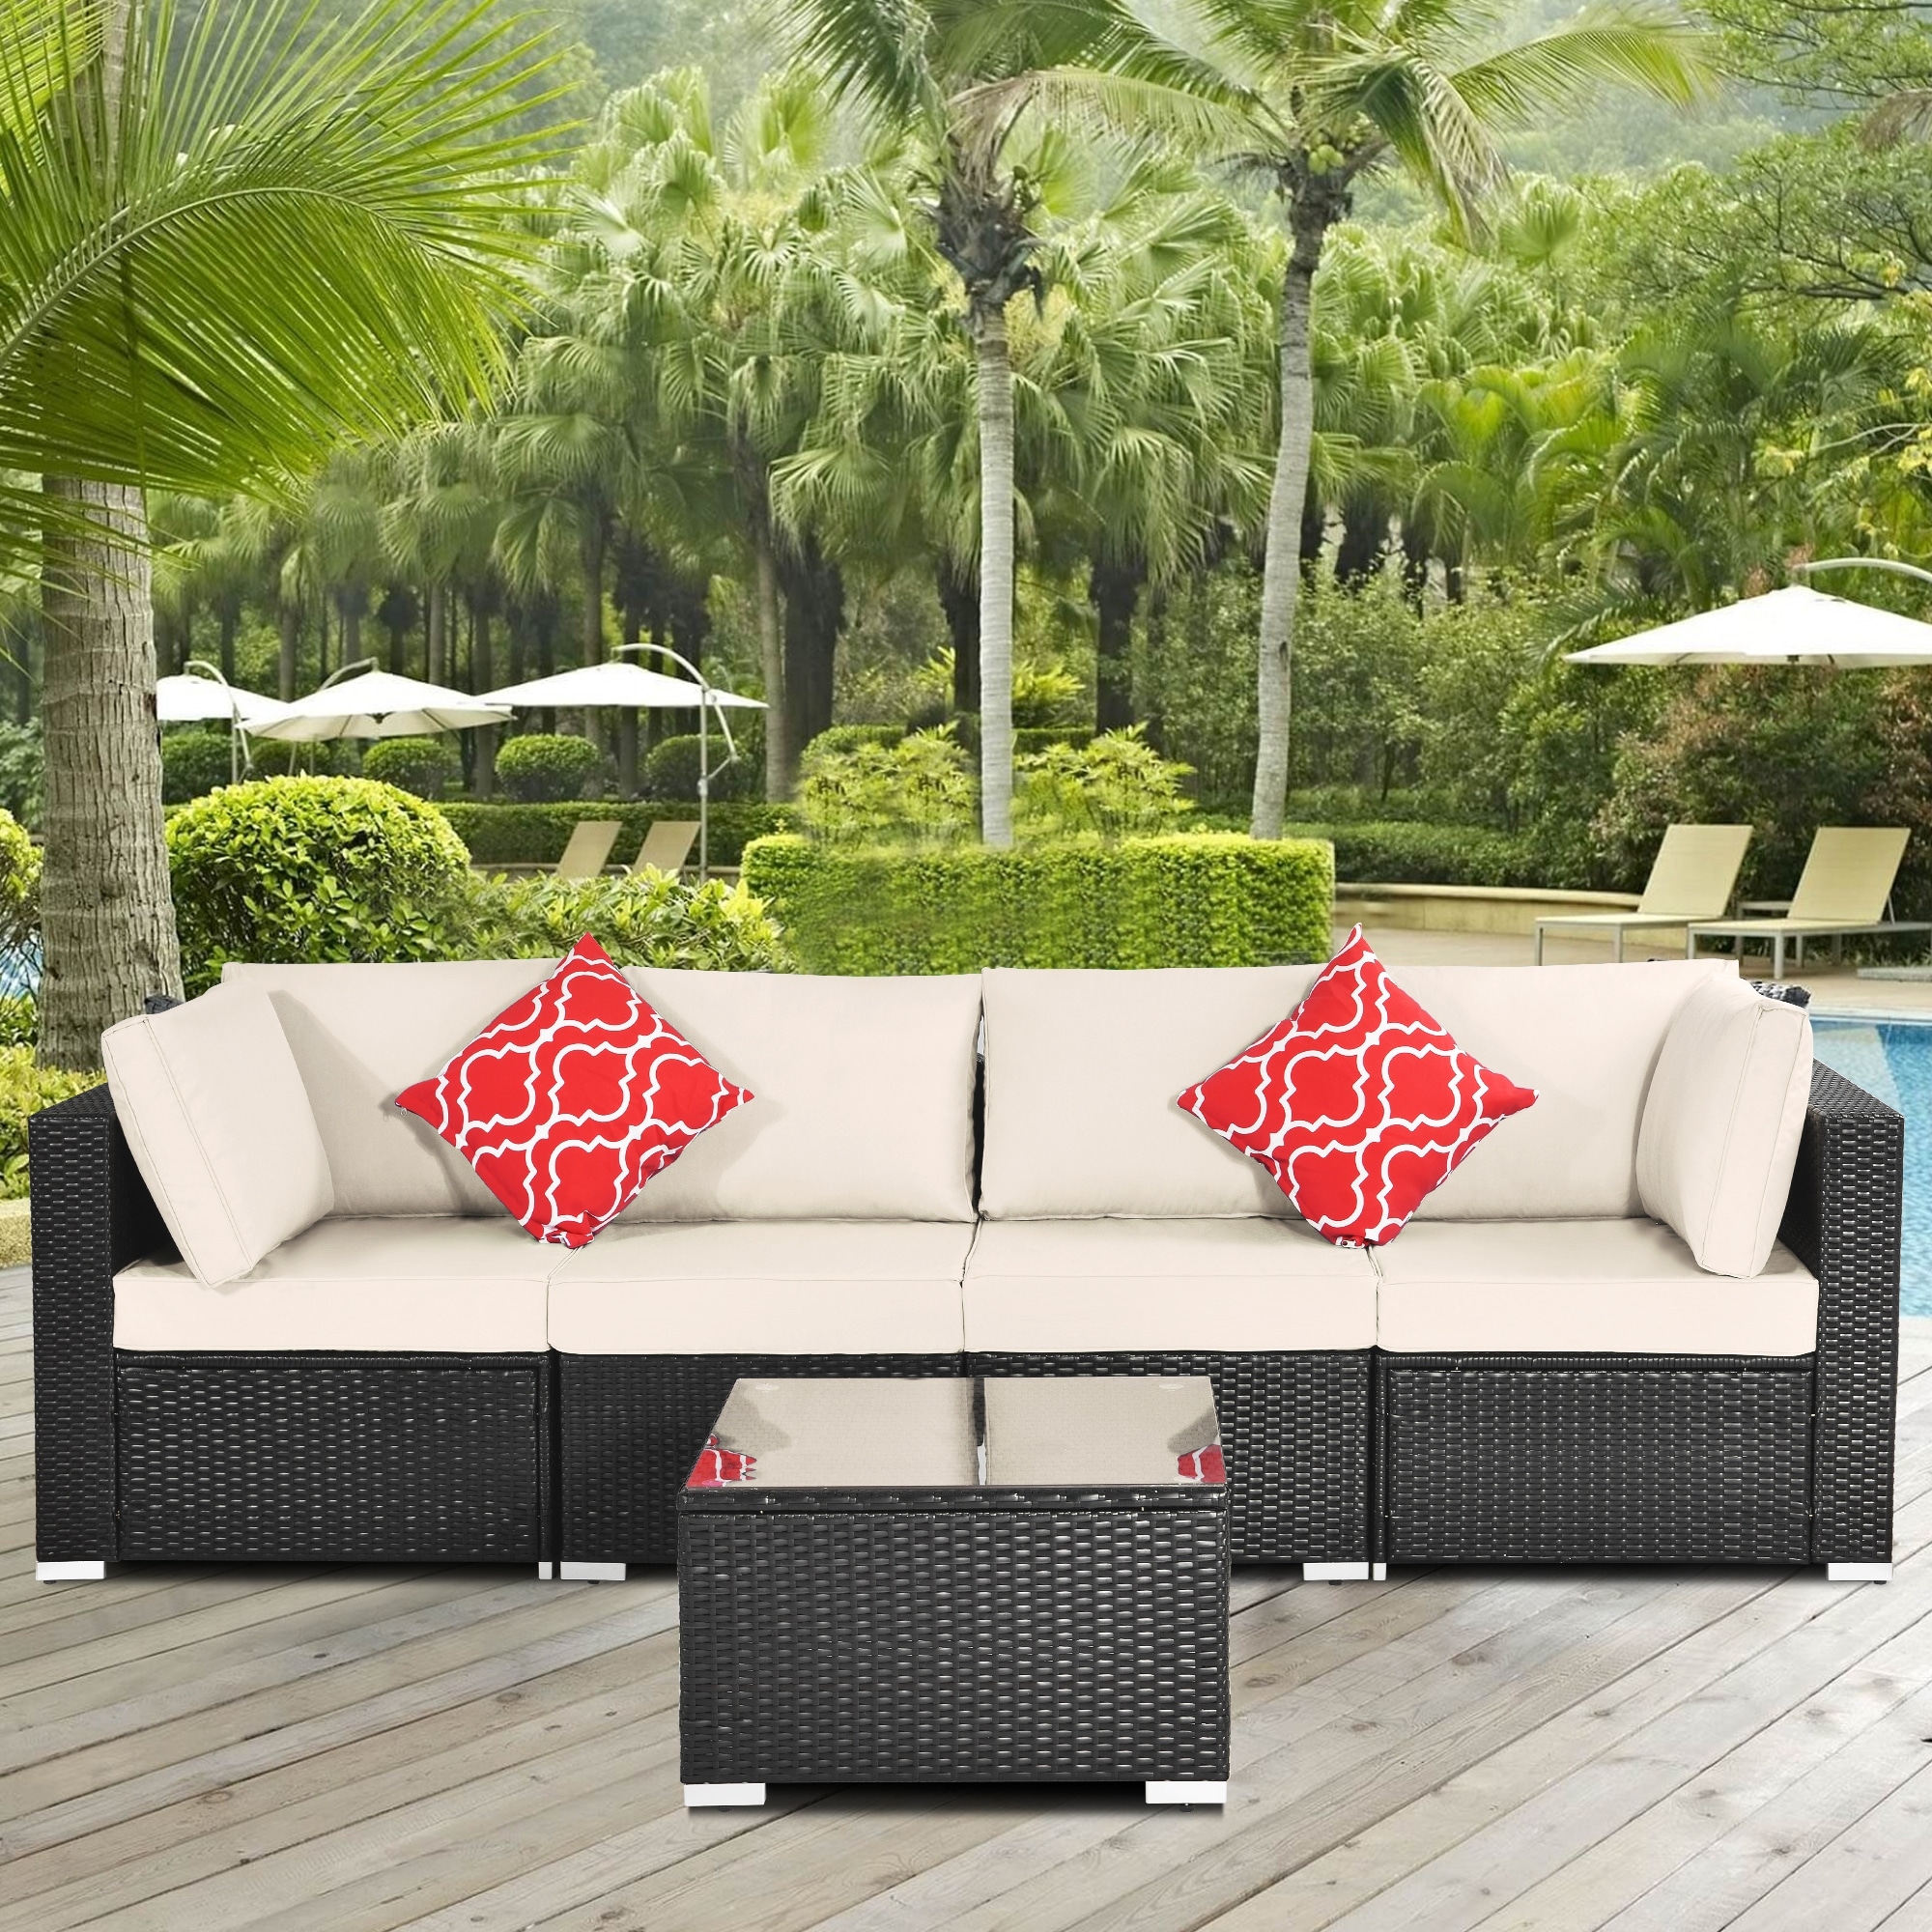 5-piece Garden Patio Furniture Sofa Set With Glass Table